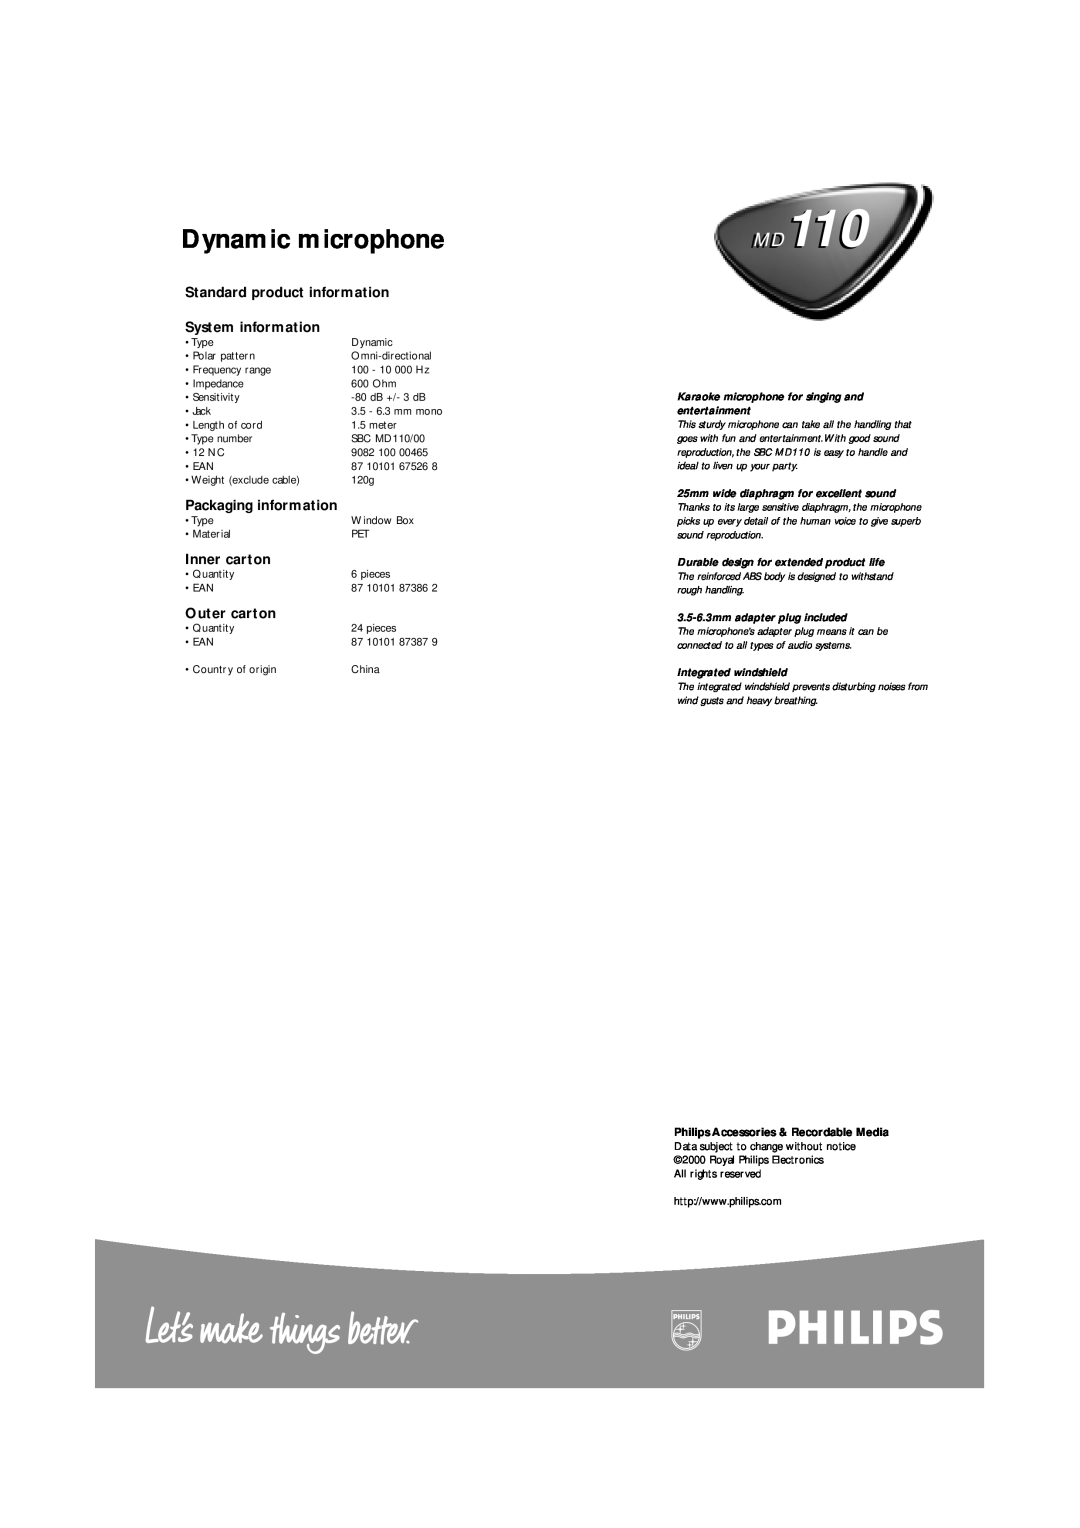 Philips MD110 Dynamic microphone, Standard product information System information, Packaging information, Inner carton 